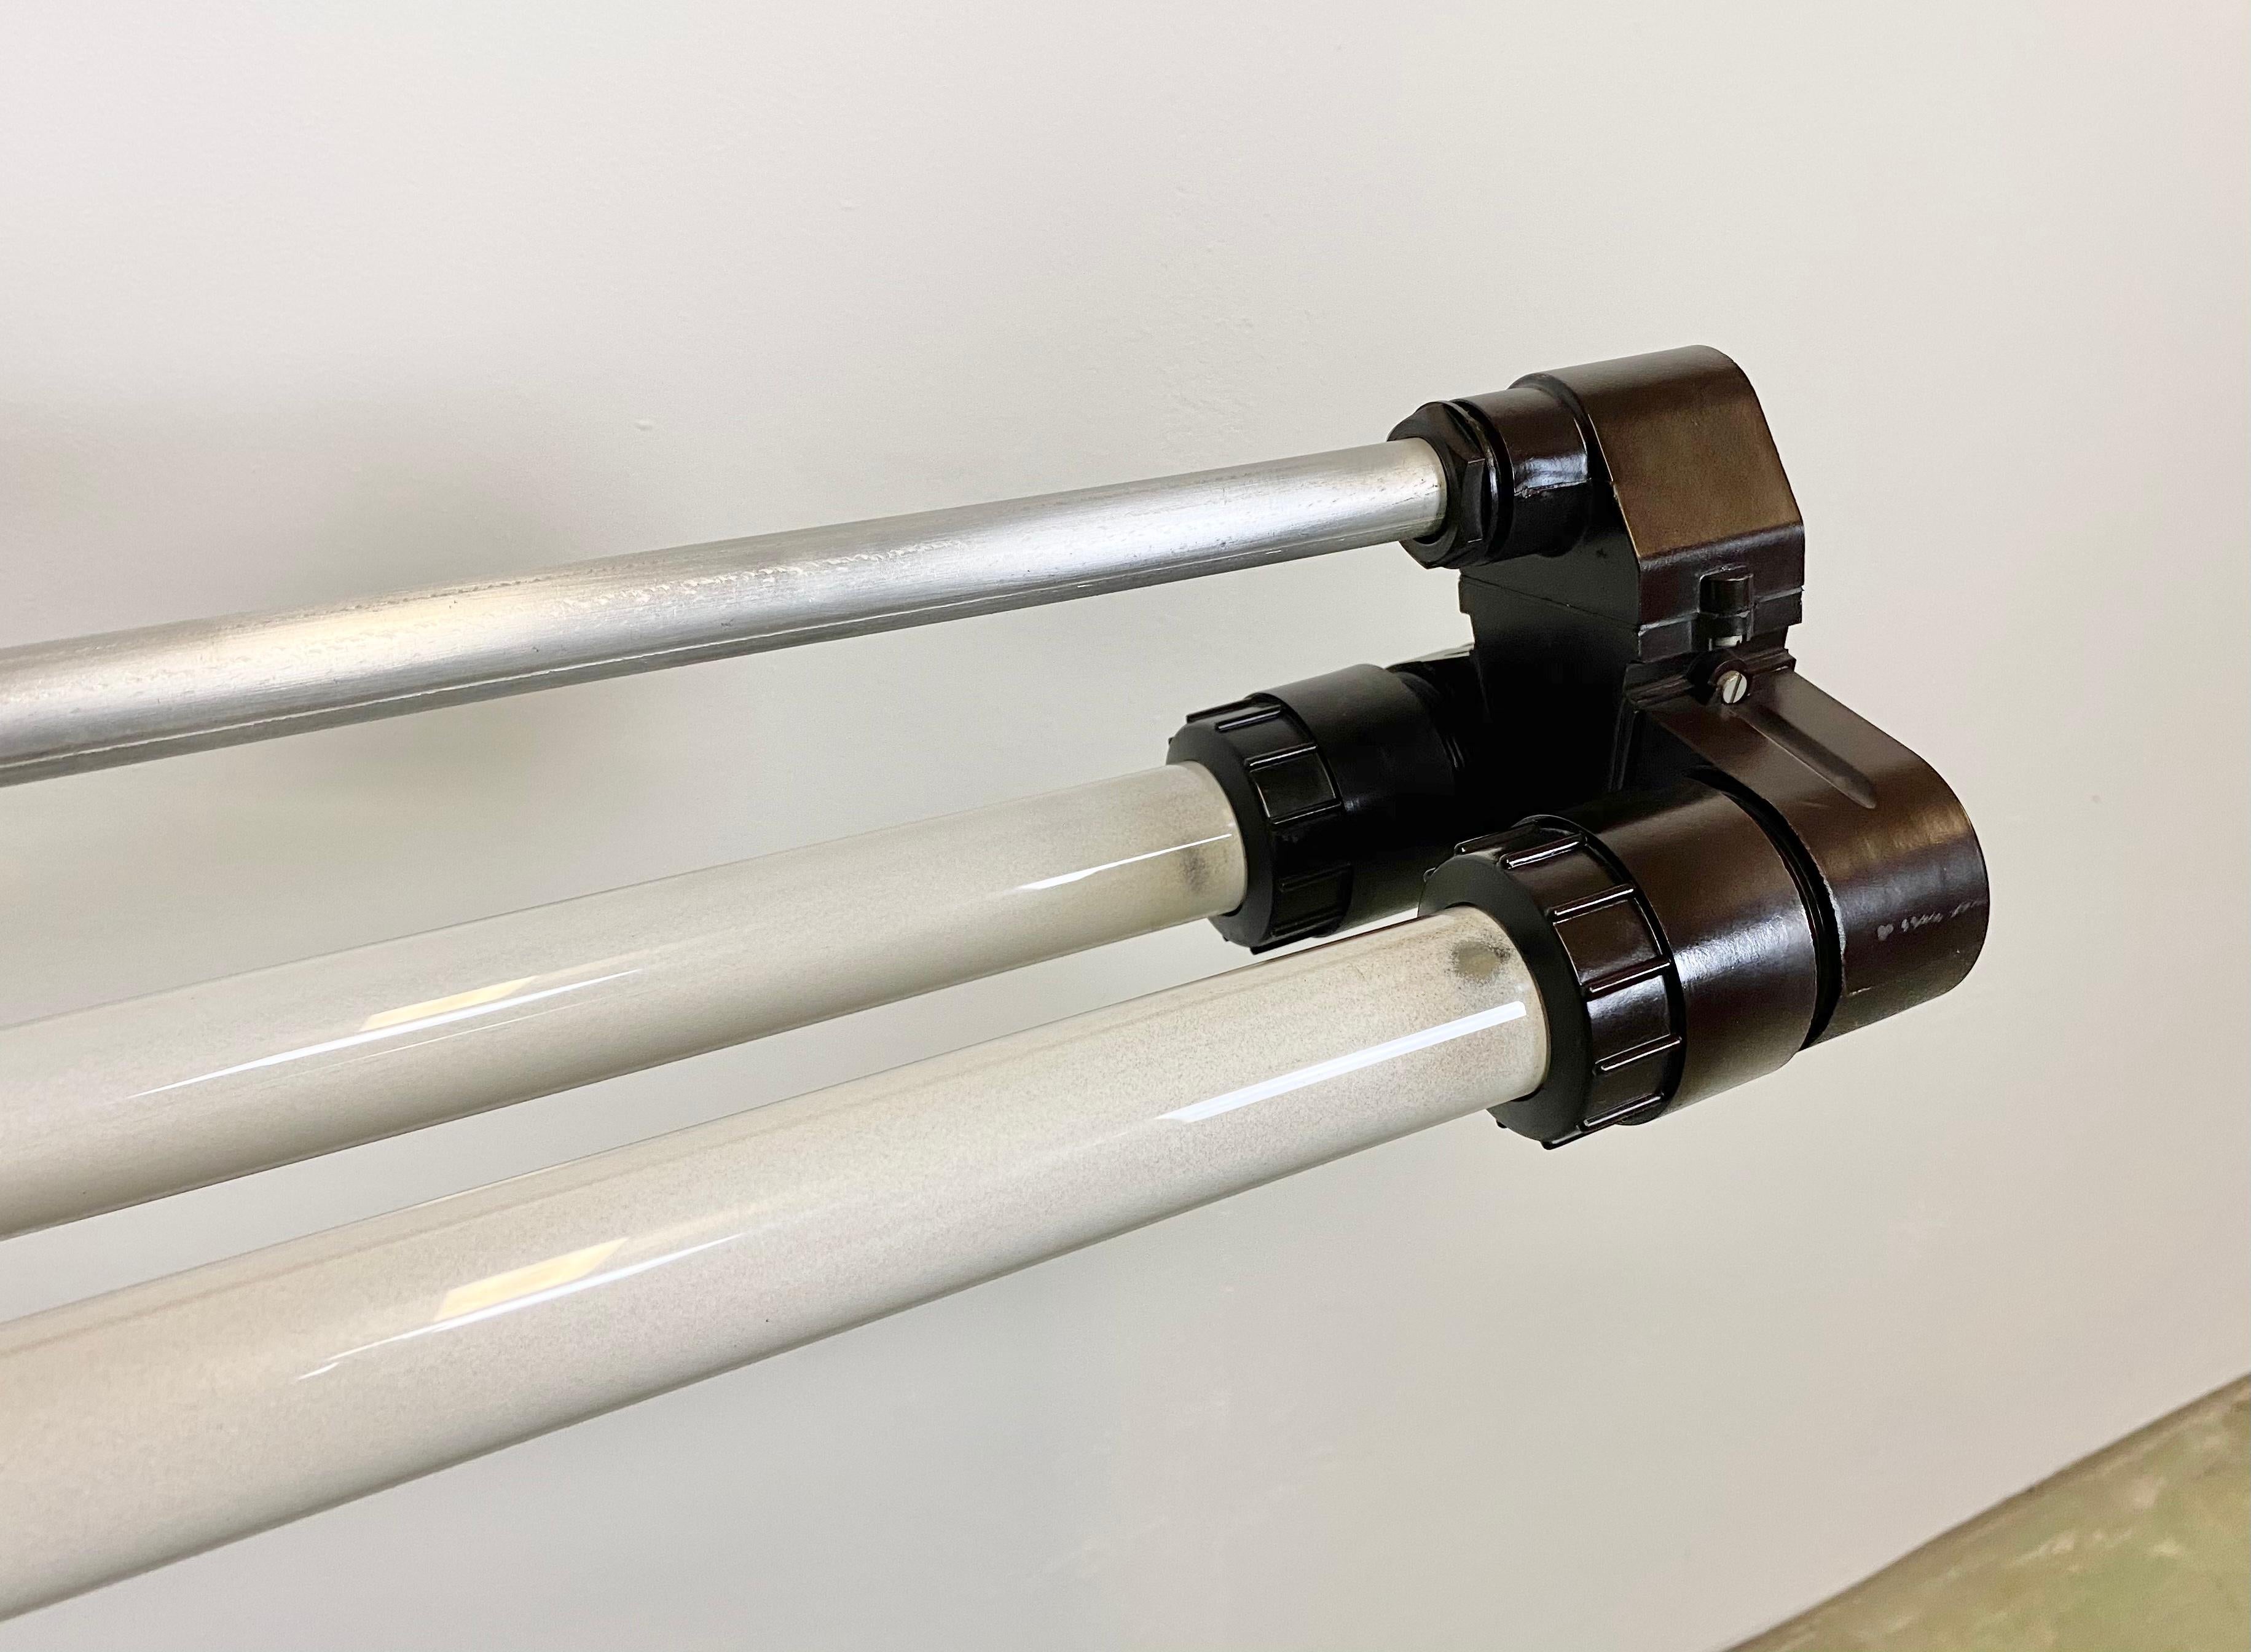 This industrial cast aluminium and Bakelite fluorescent light was made during the 1970s in former Czechoslovakia. These fixtures were used in laboratories and chemical and industrial plants. The light requires two T8, 150 cm fluorescent tubes. The